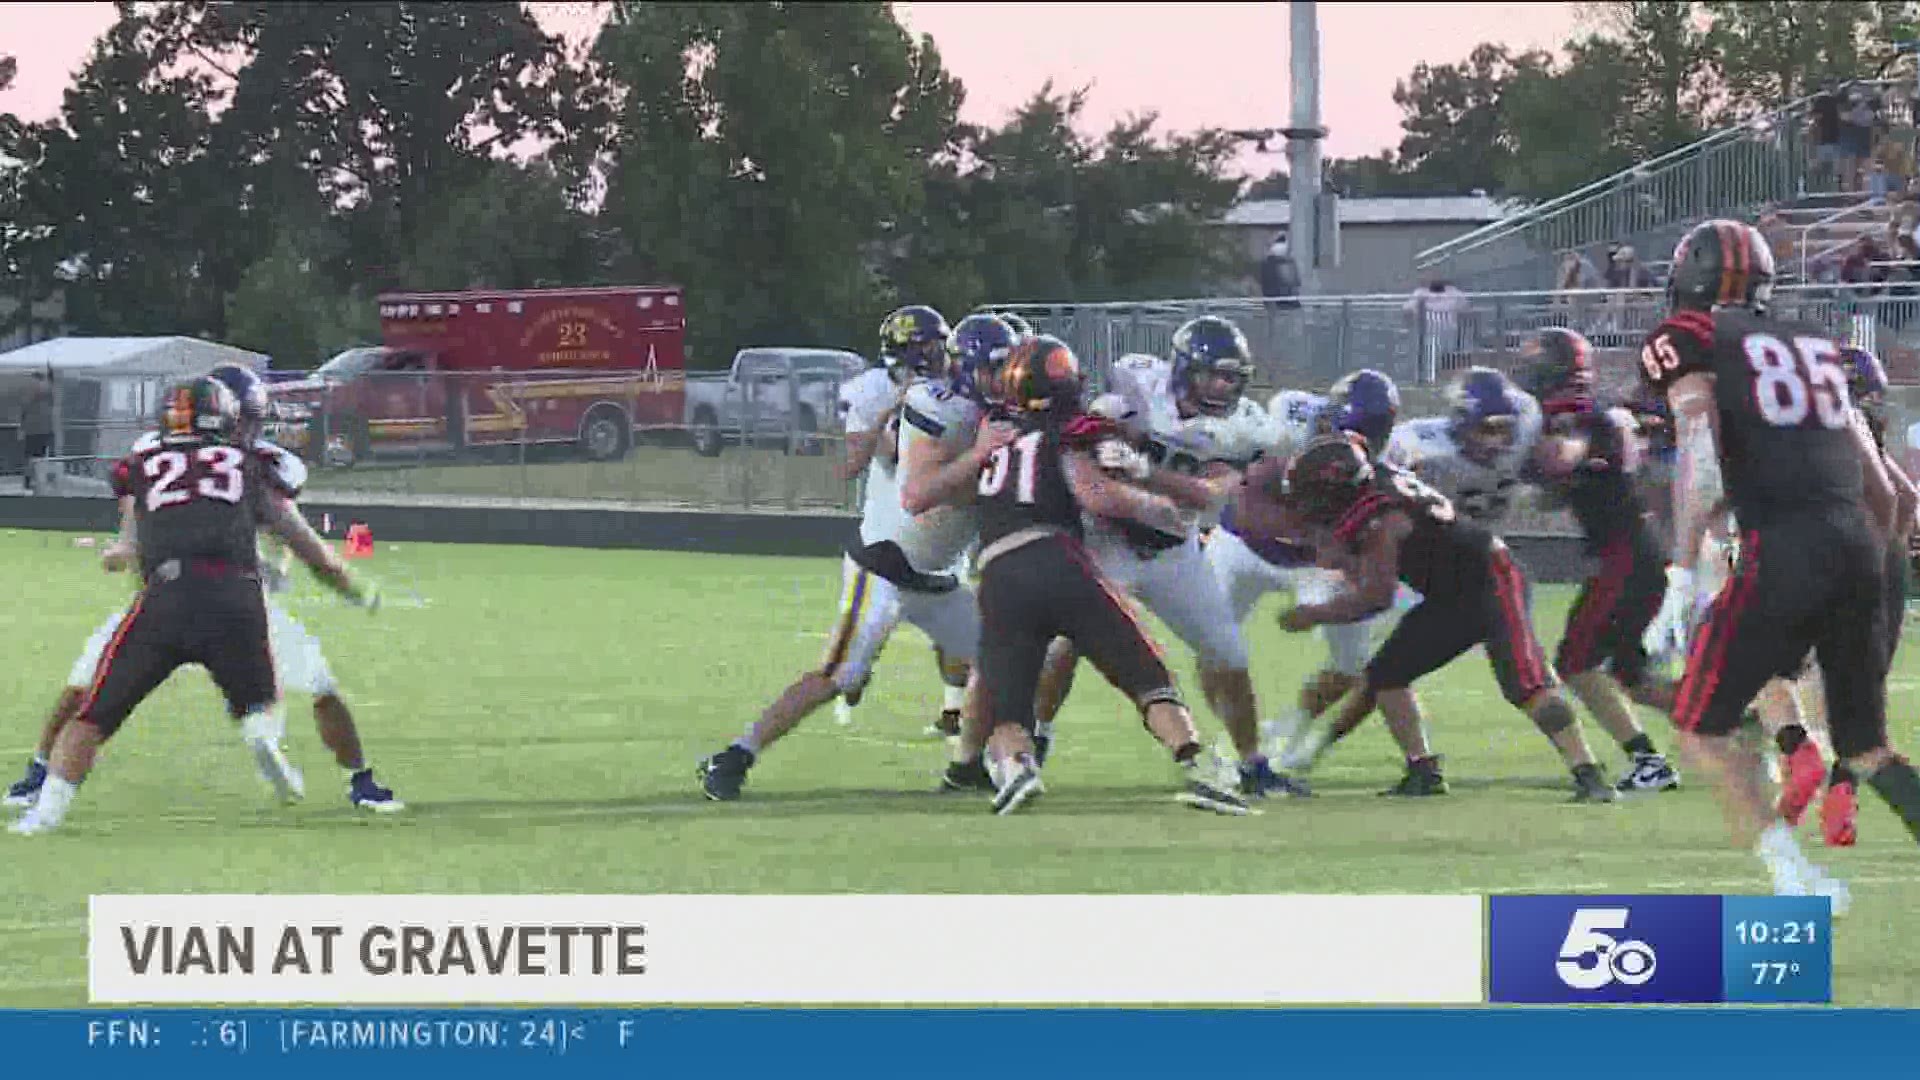 The Vian Wolverines traveled to Gravette to kick off the 2020 football season.